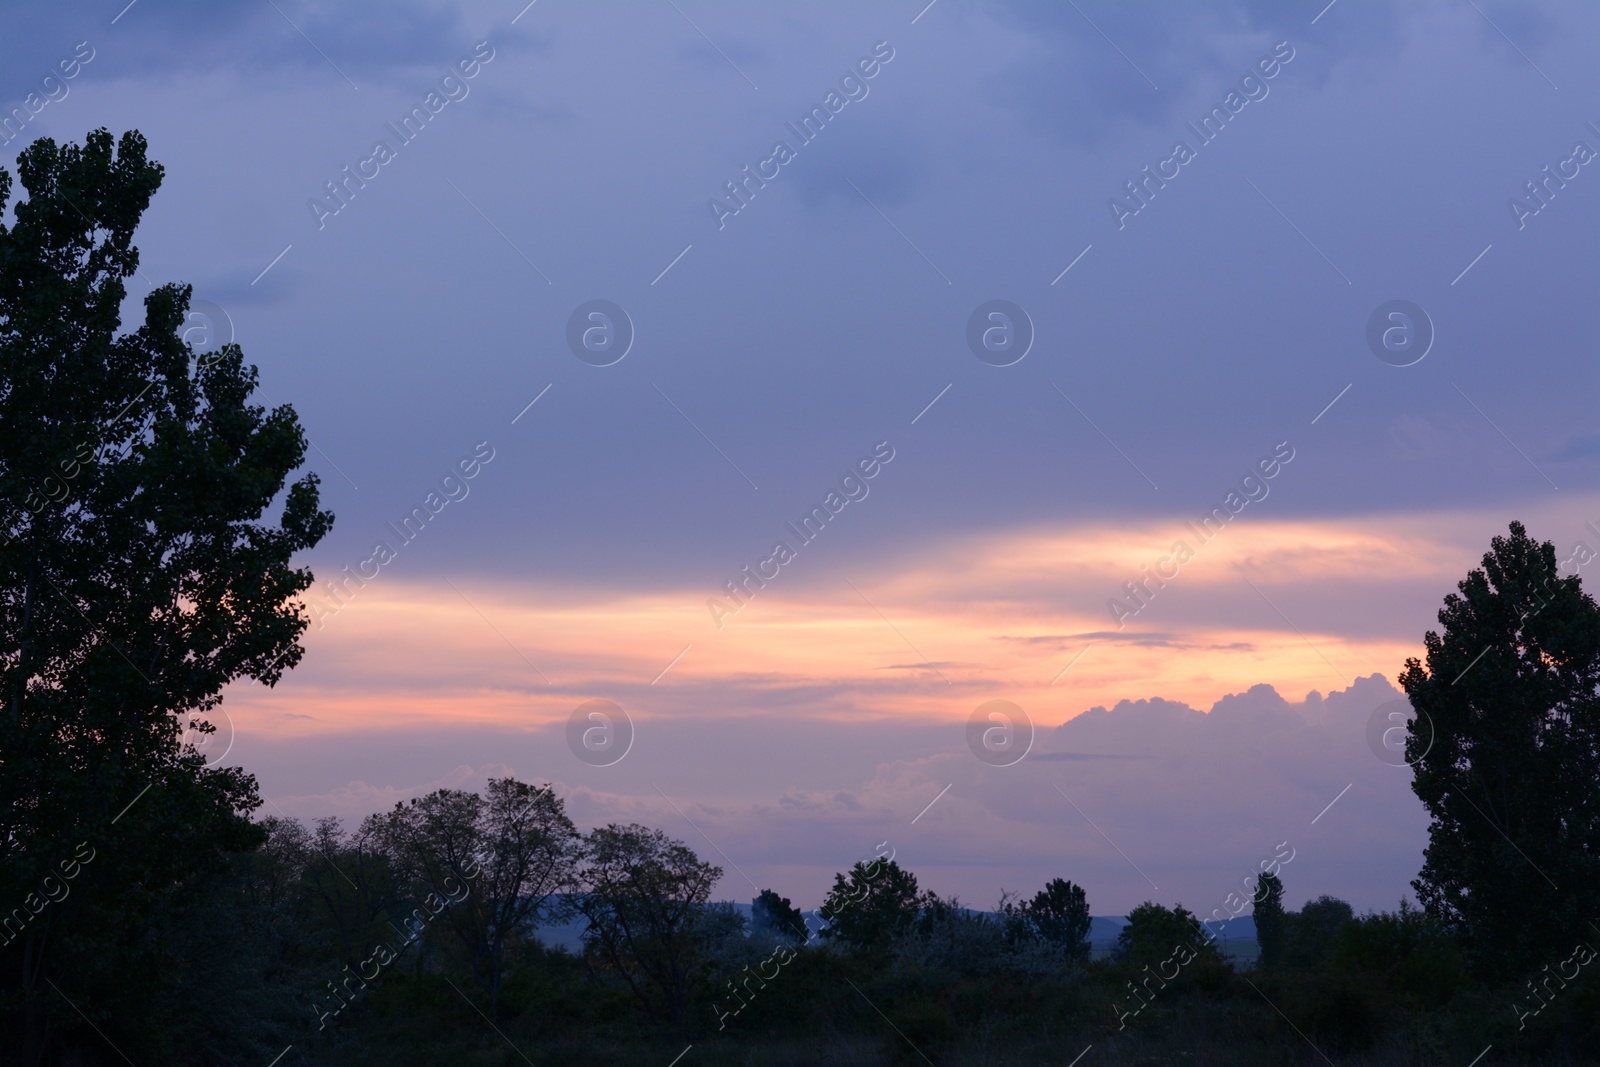 Photo of Picturesque view on cloudy sky over trees at sunset